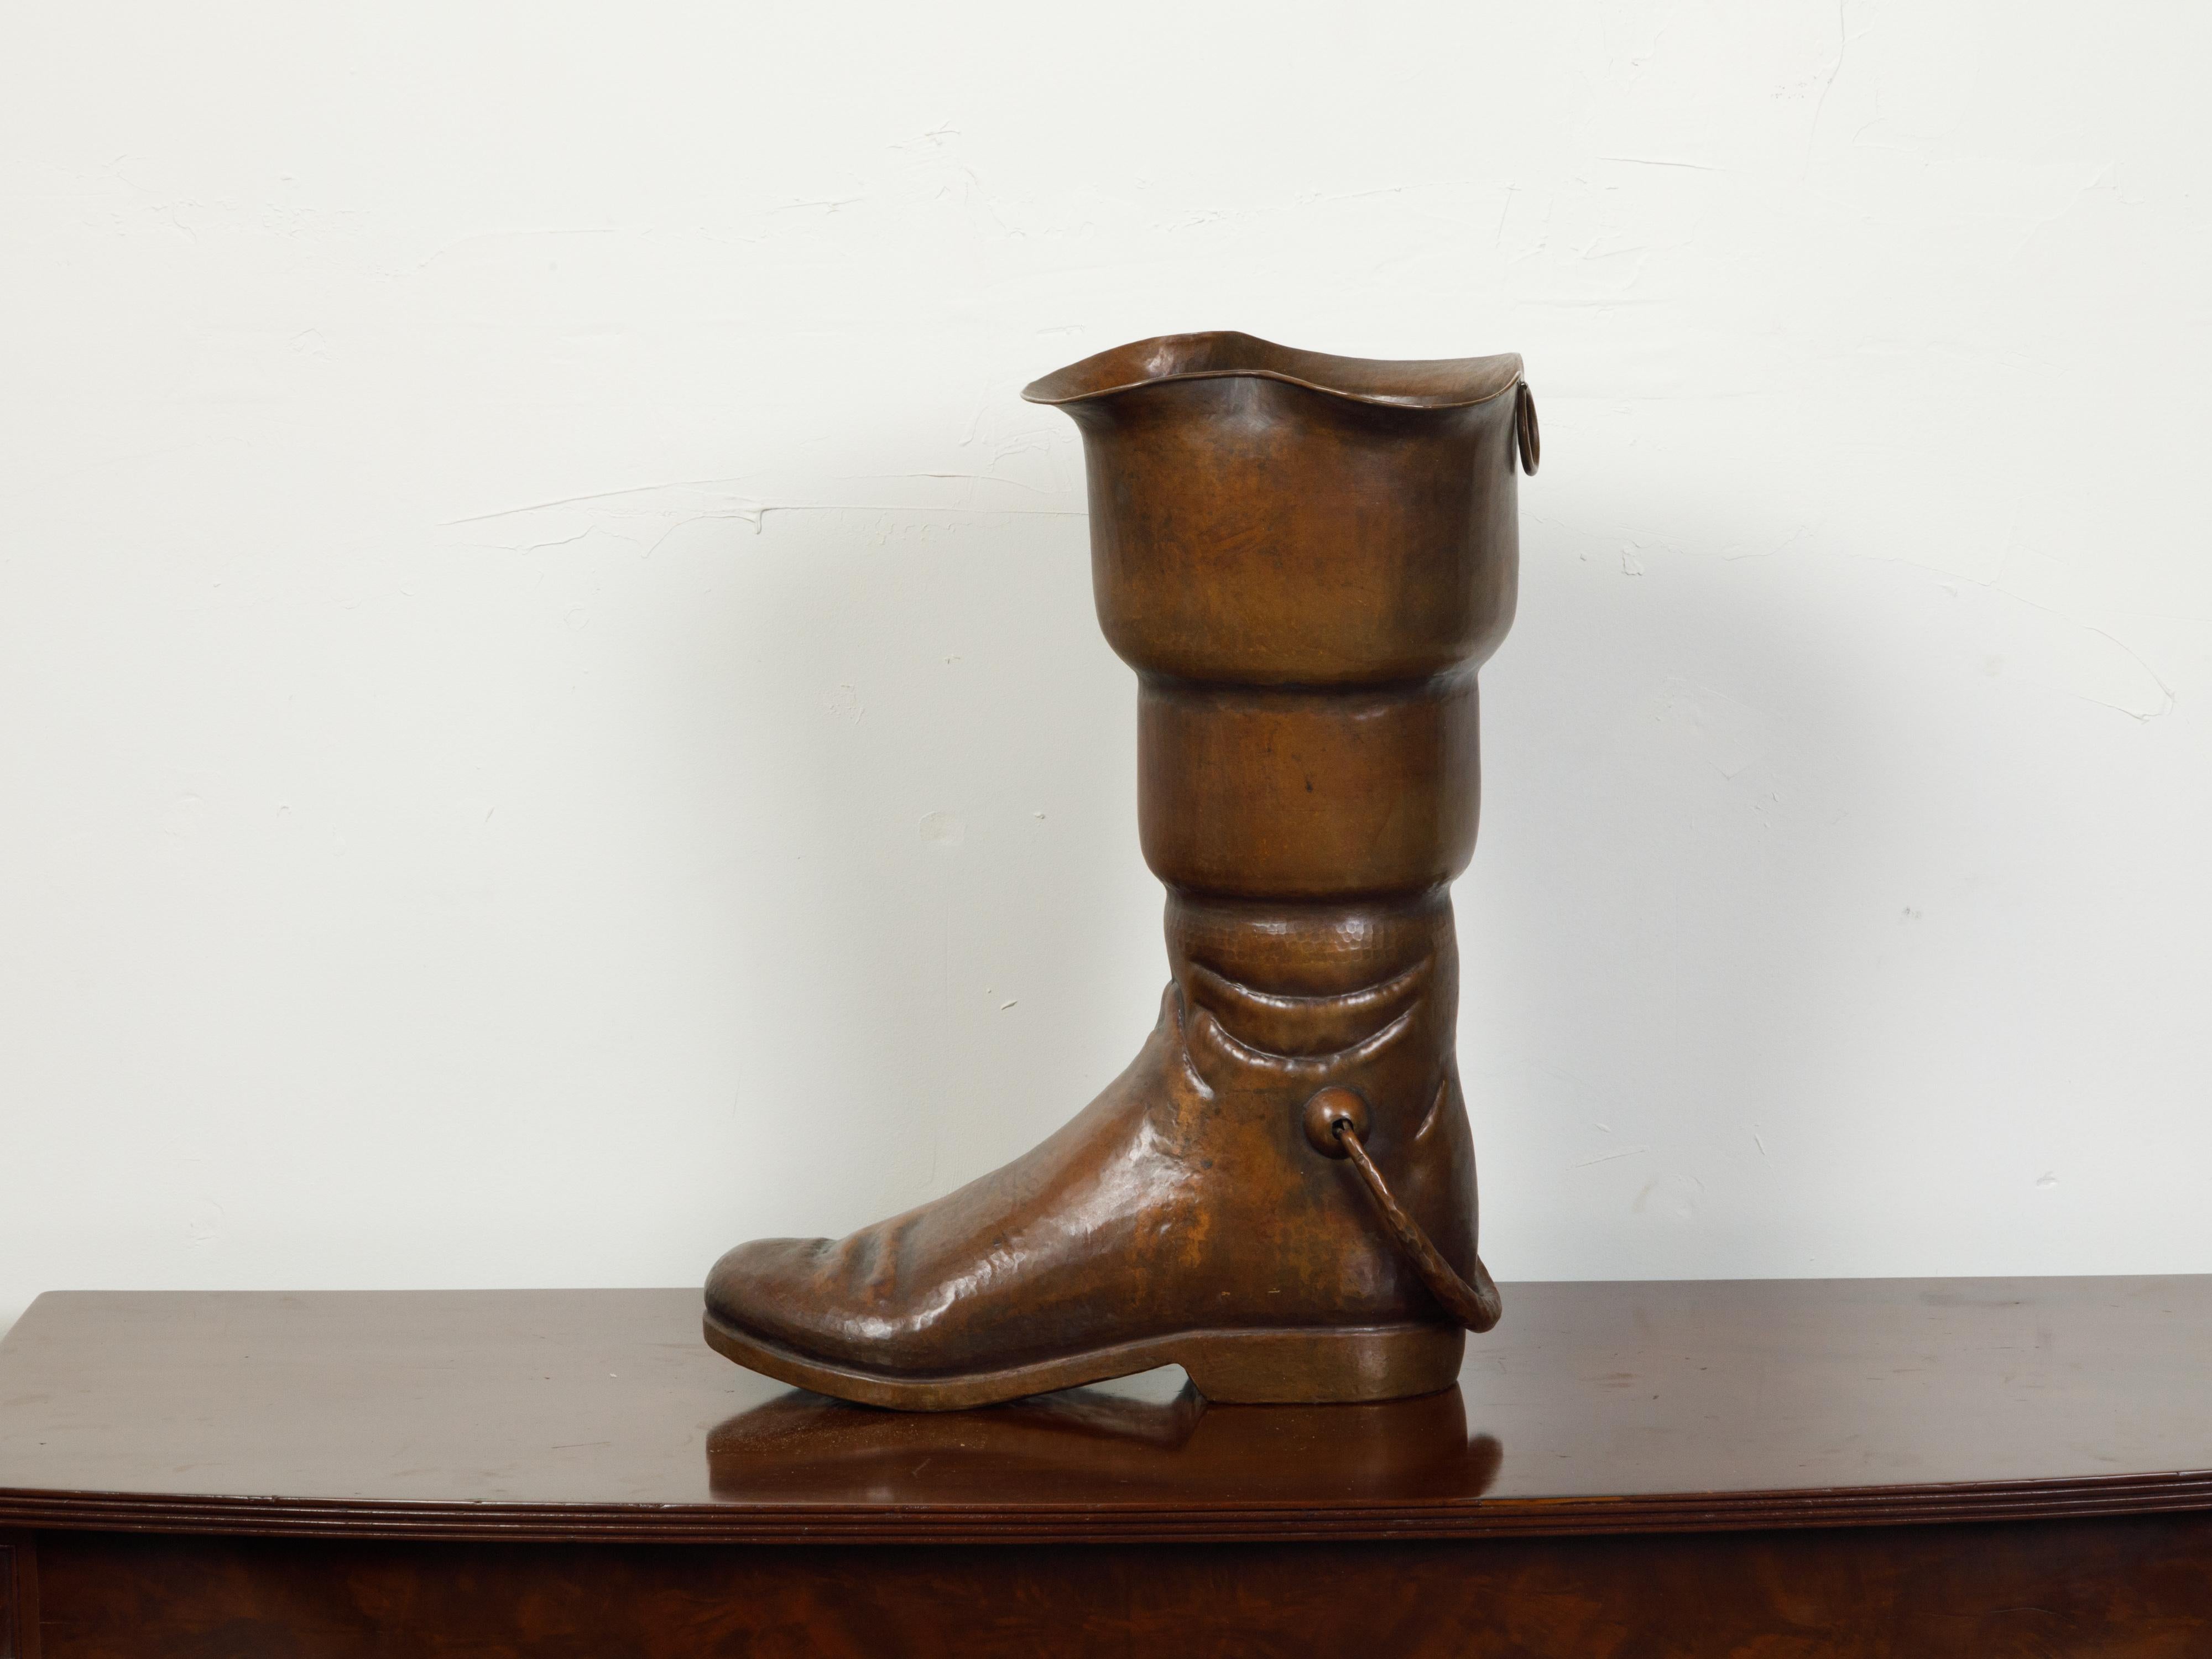 An English copper umbrella stand from the mid 20th century, depicting a boot. Created in England during the Midcentury period, this copper umbrella stand features a copper boot pierced in its center to place umbrellas in it. A charming addition to